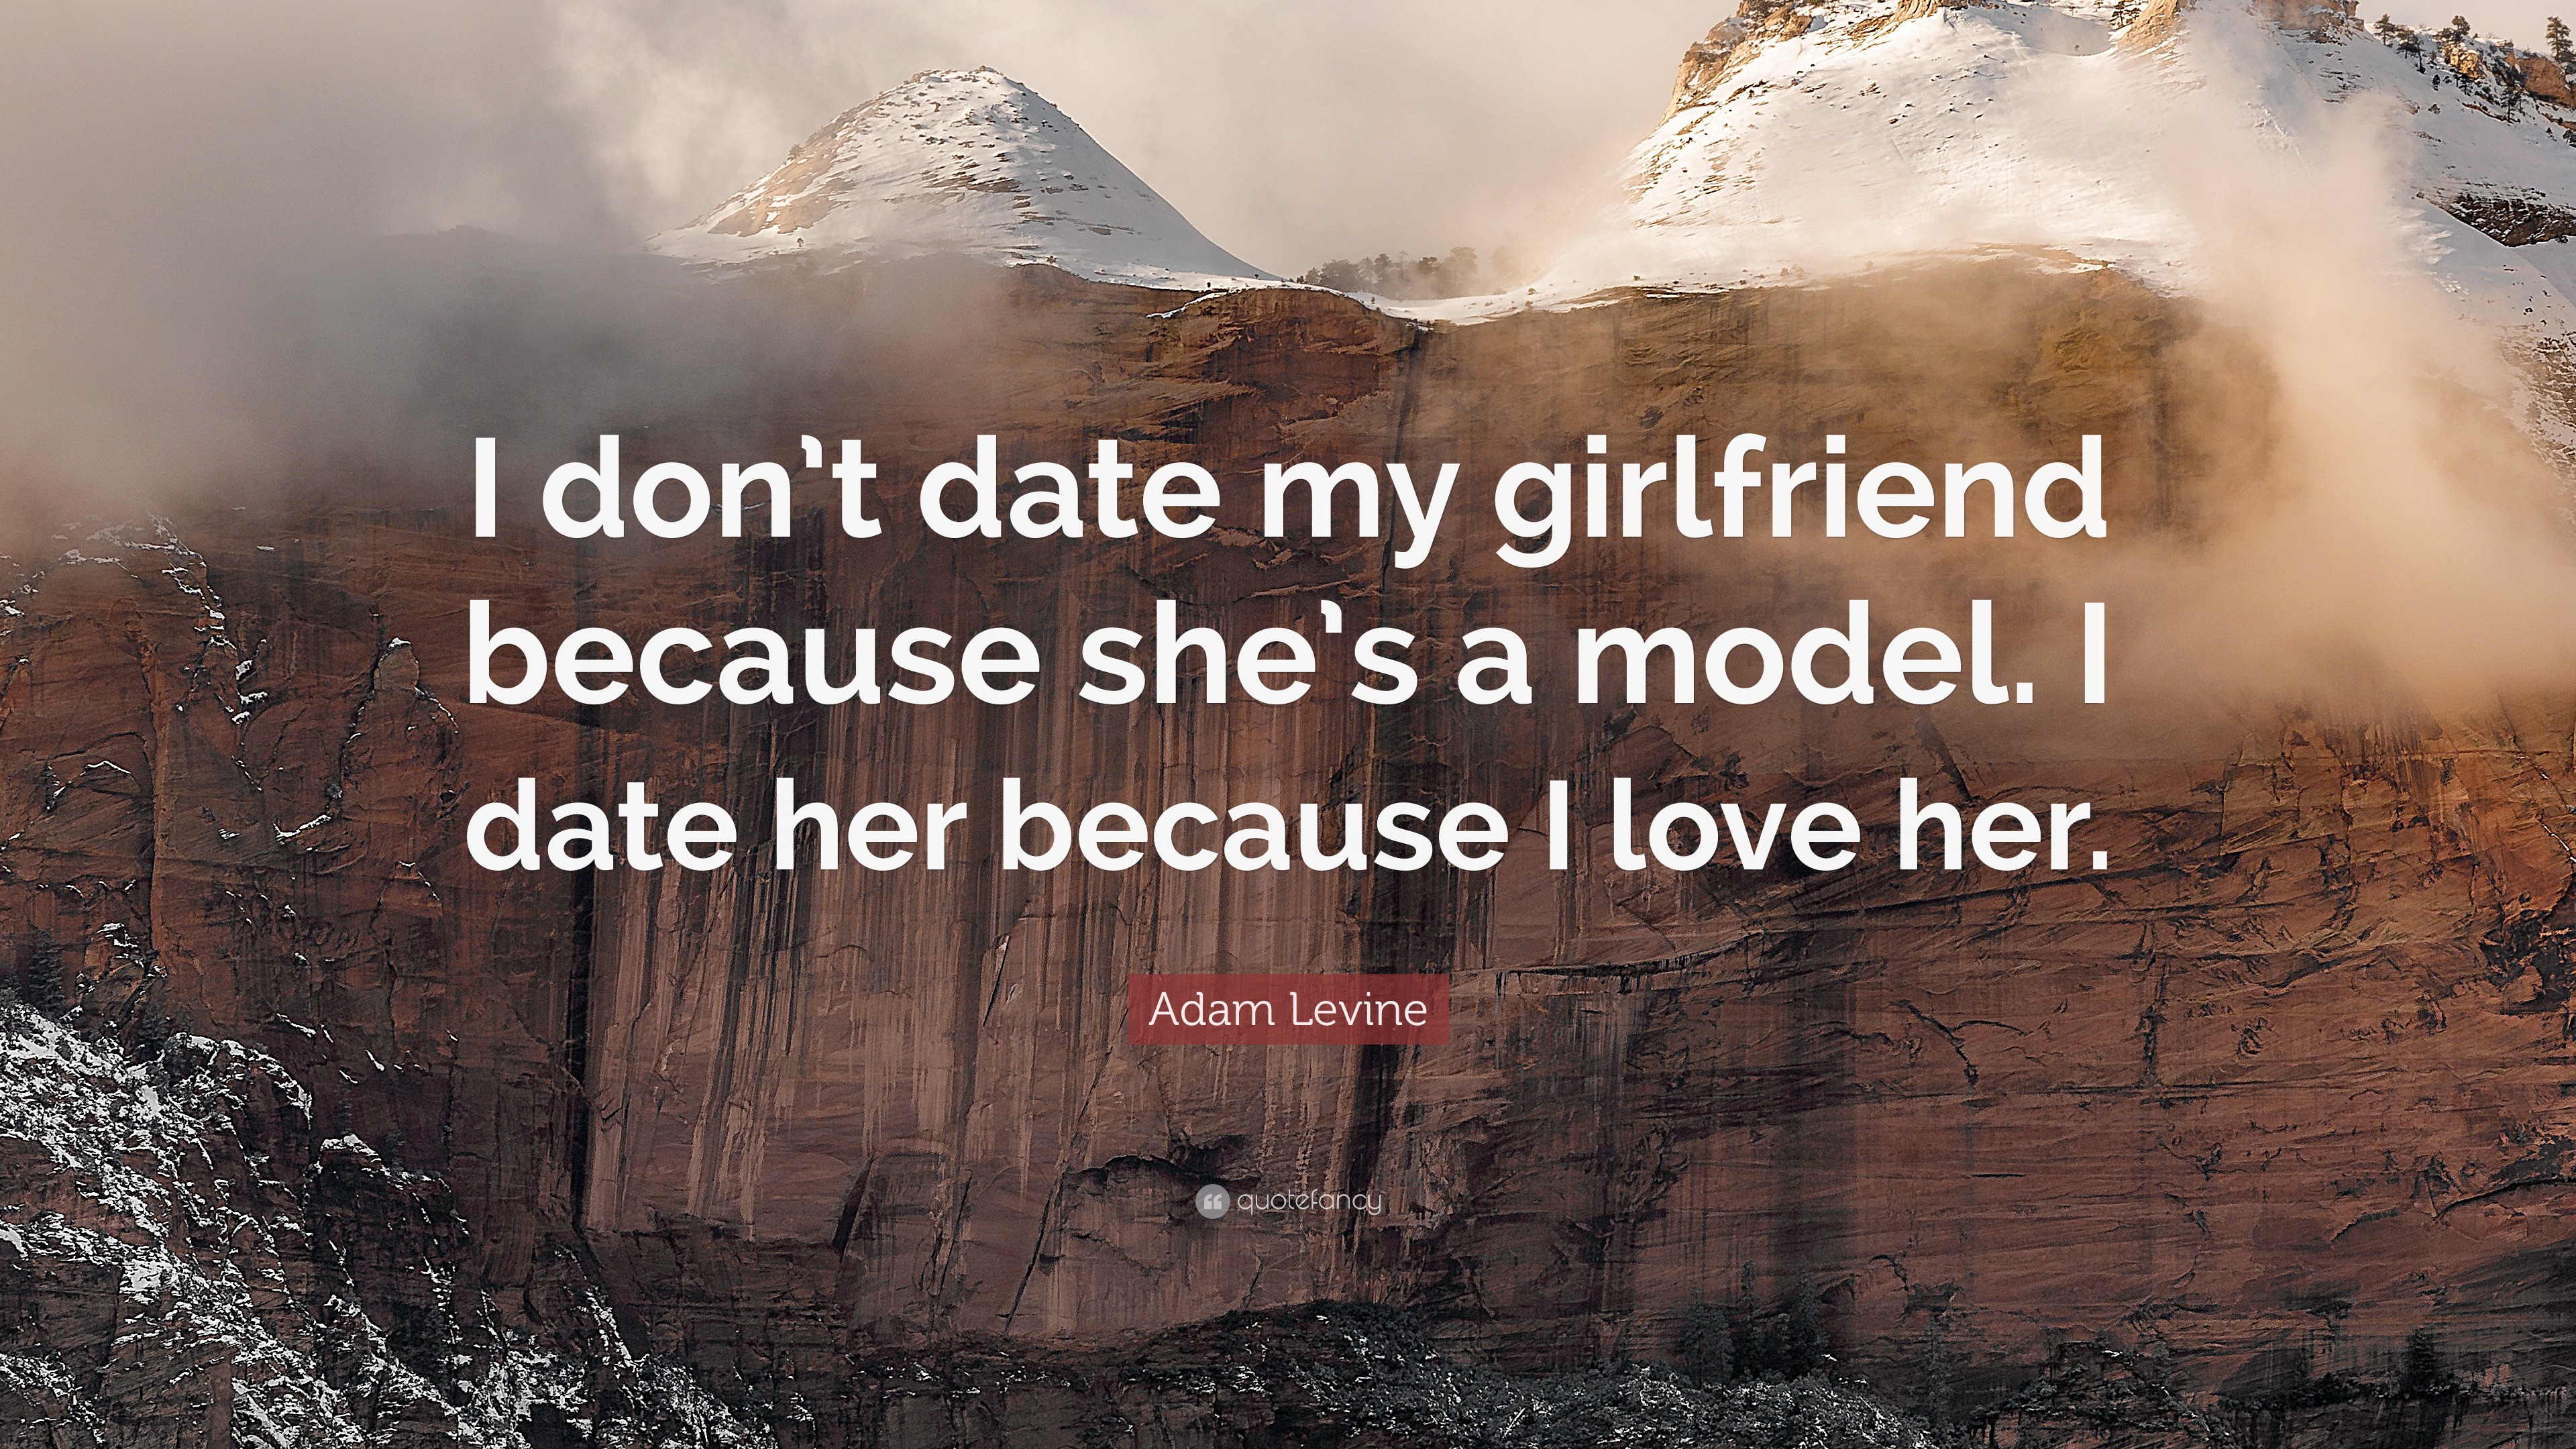 Adam Levine Quote: “I don't date my girlfriend because she's a model. I  date her